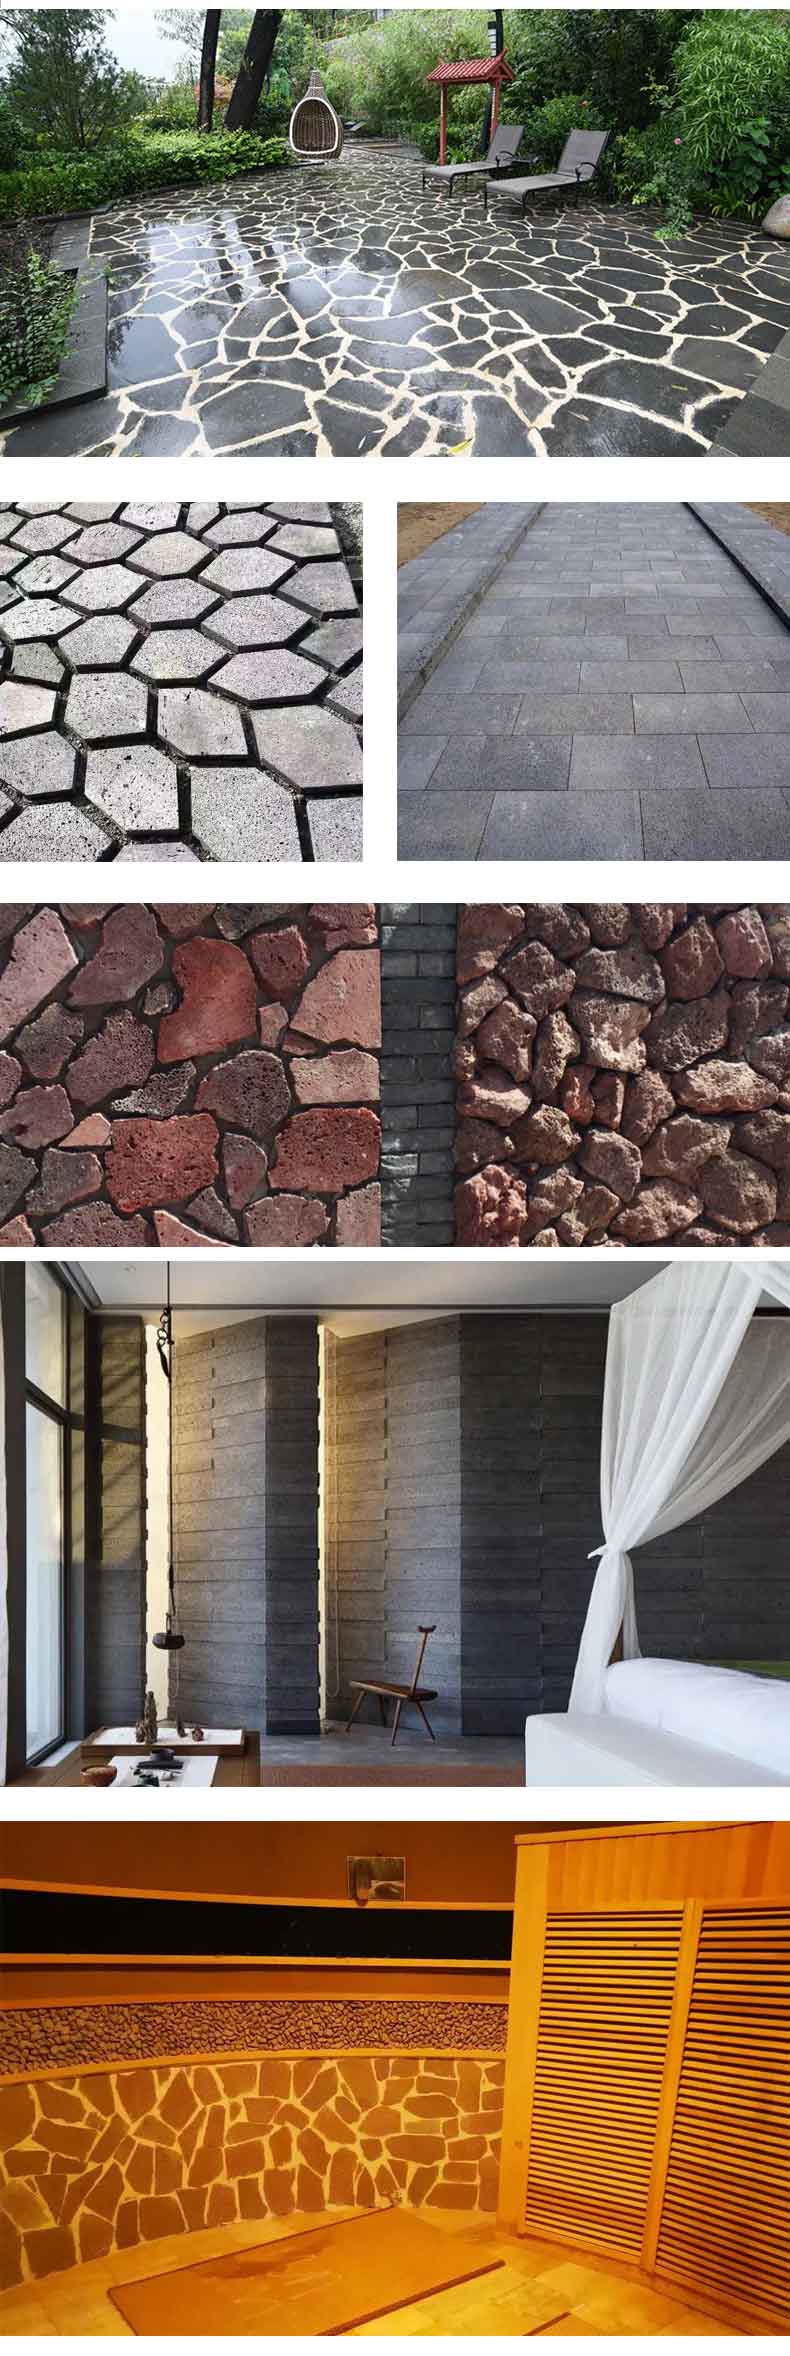 Volcanic slate red and black wall decoration Wall volcanic slate Villa landscaping stone